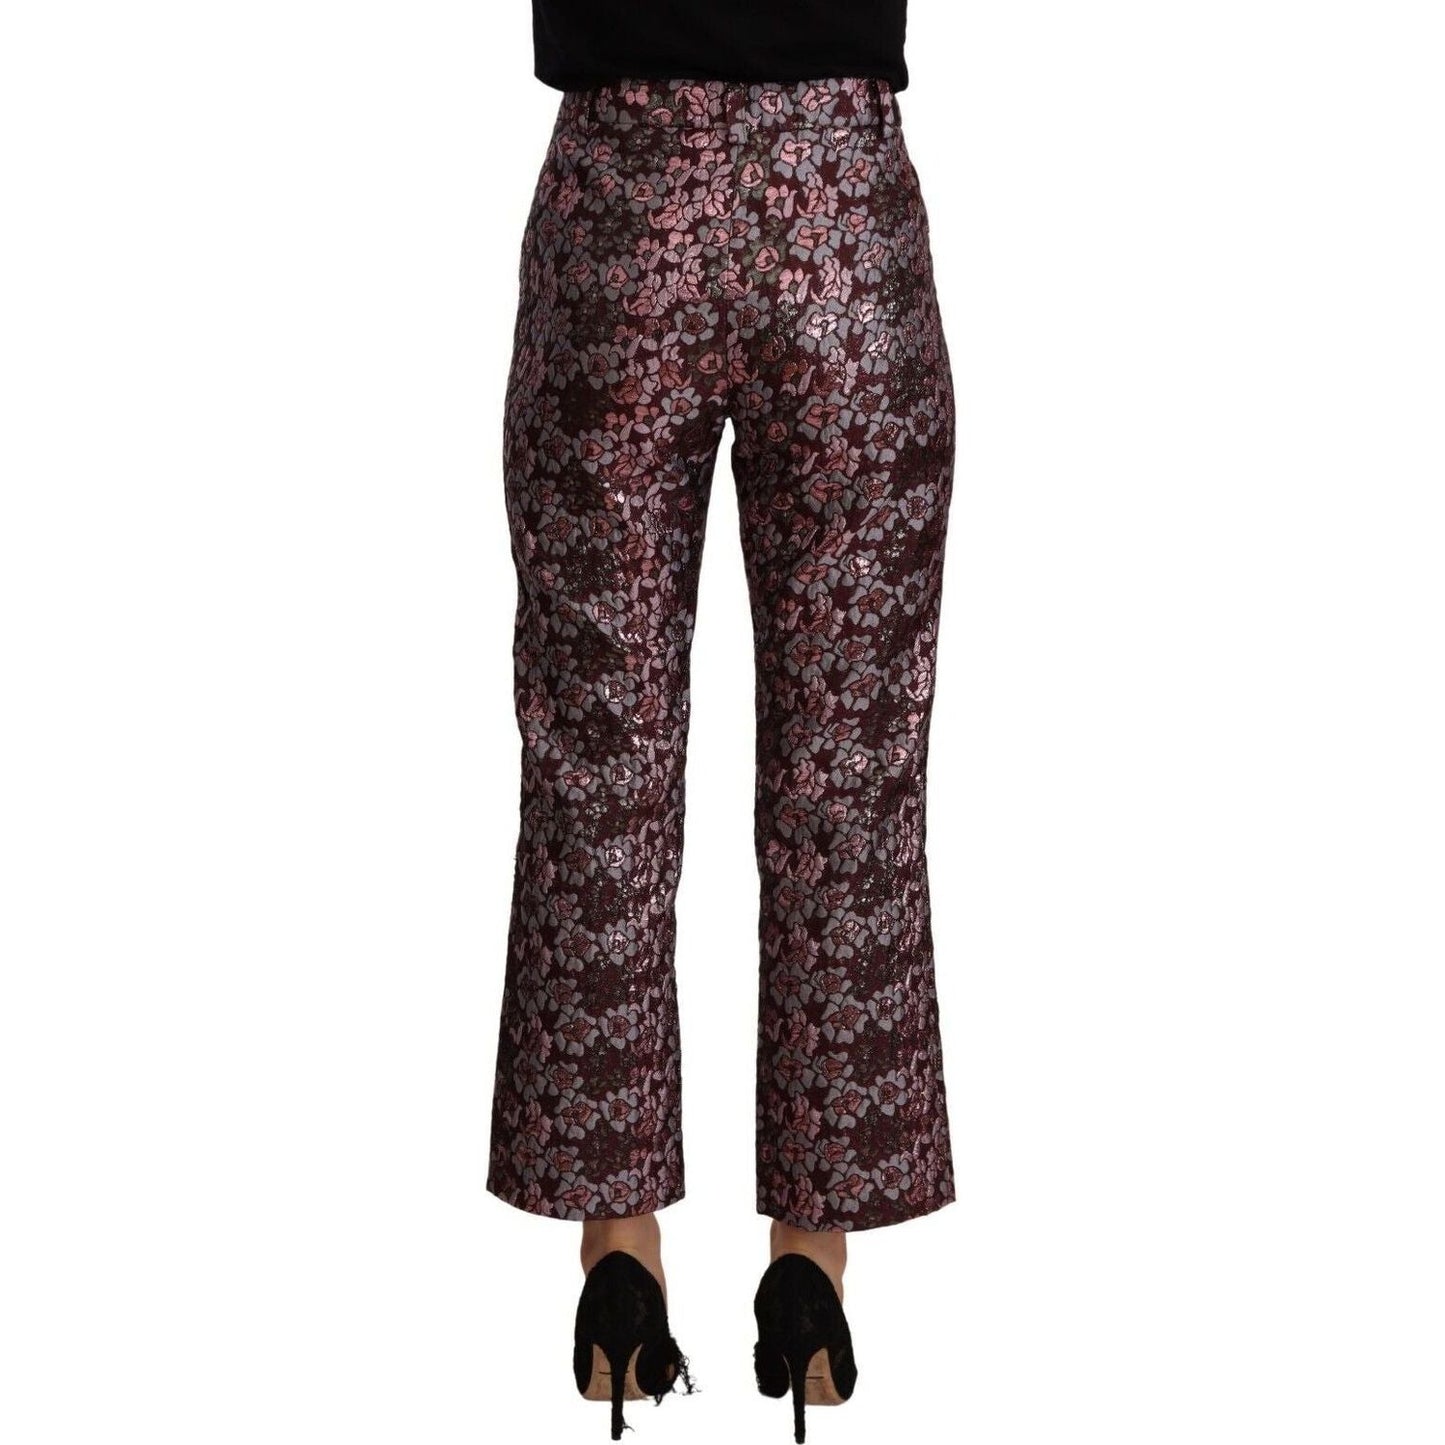 House of Holland High Waist Jacquard Flared Cropped Trousers multicolor-floral-jacquard-flared-cropped-pants